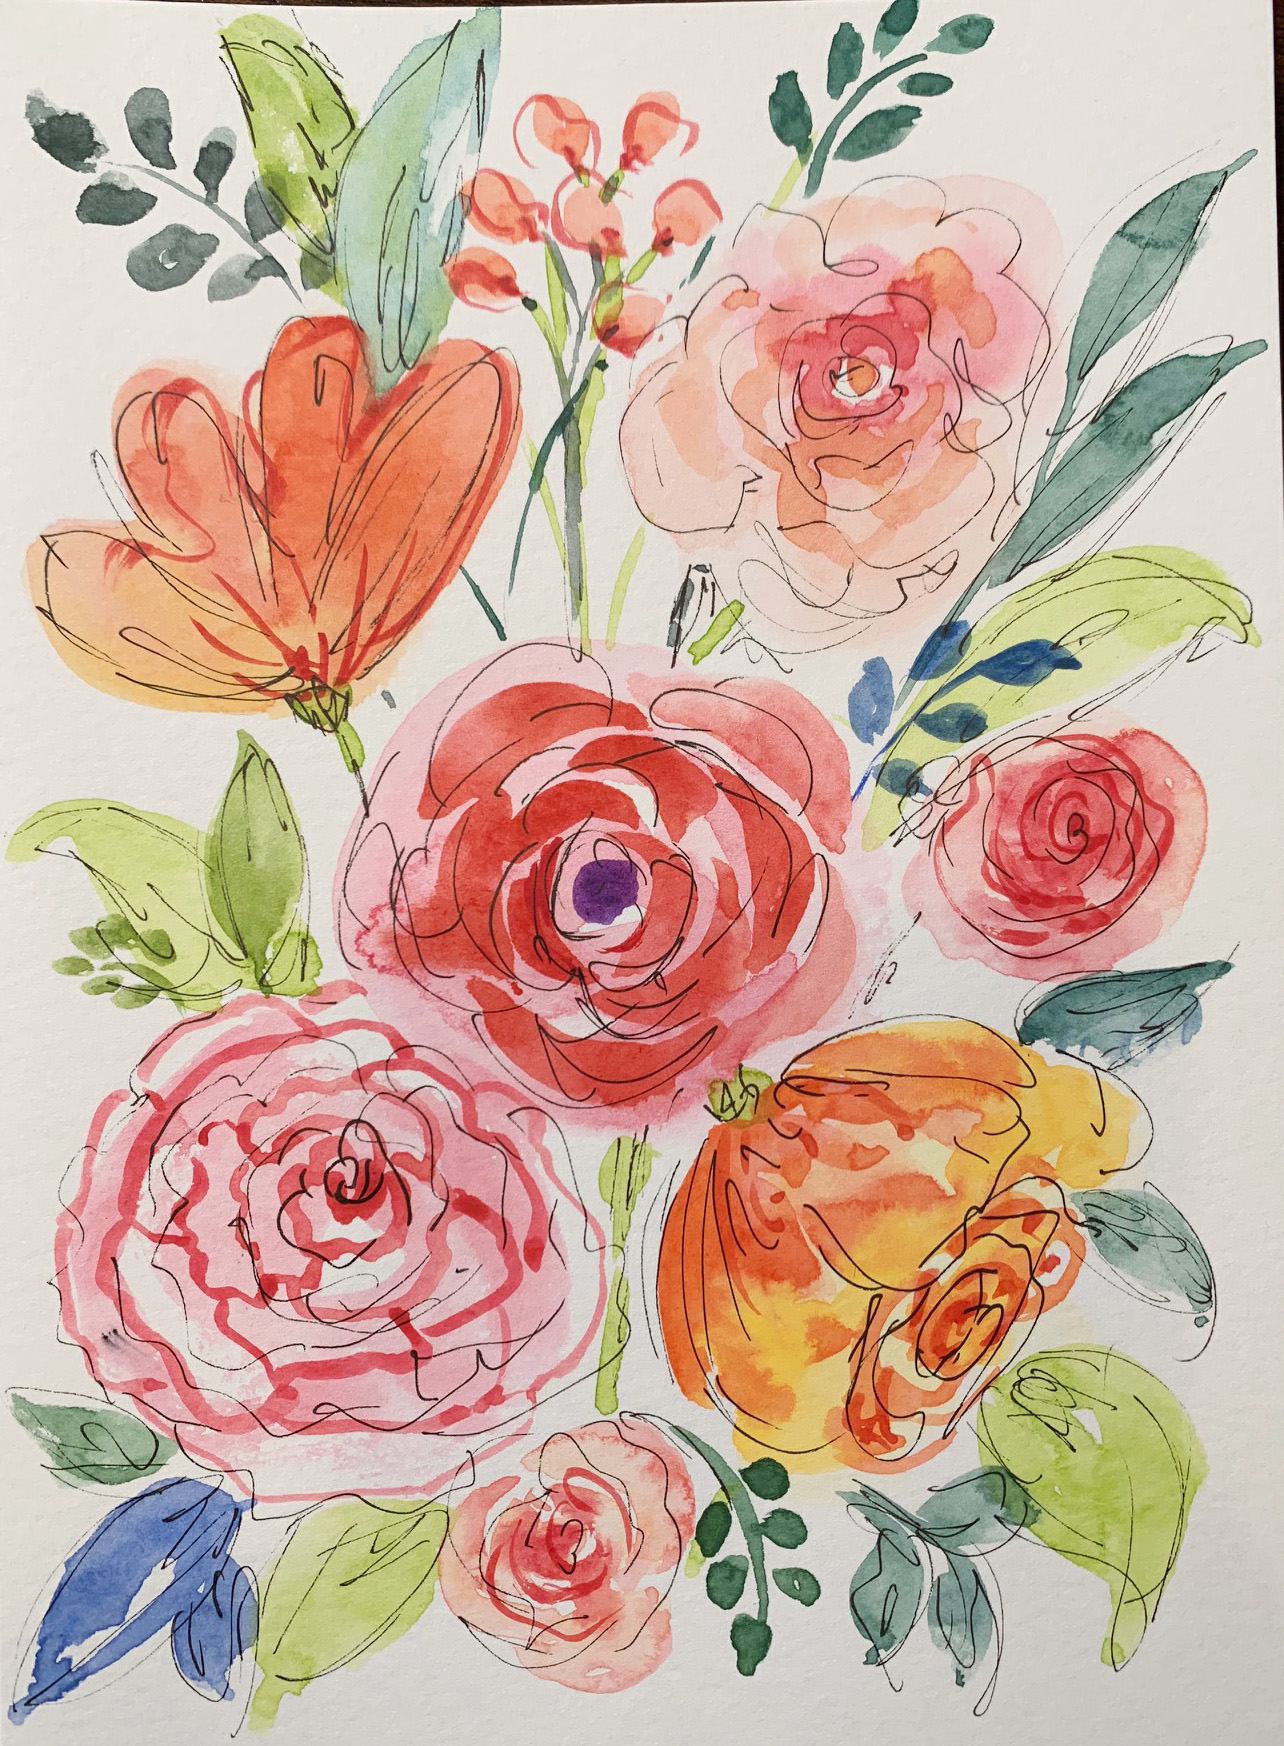 A Colorful Rose Flowers  experience project by Yaymaker